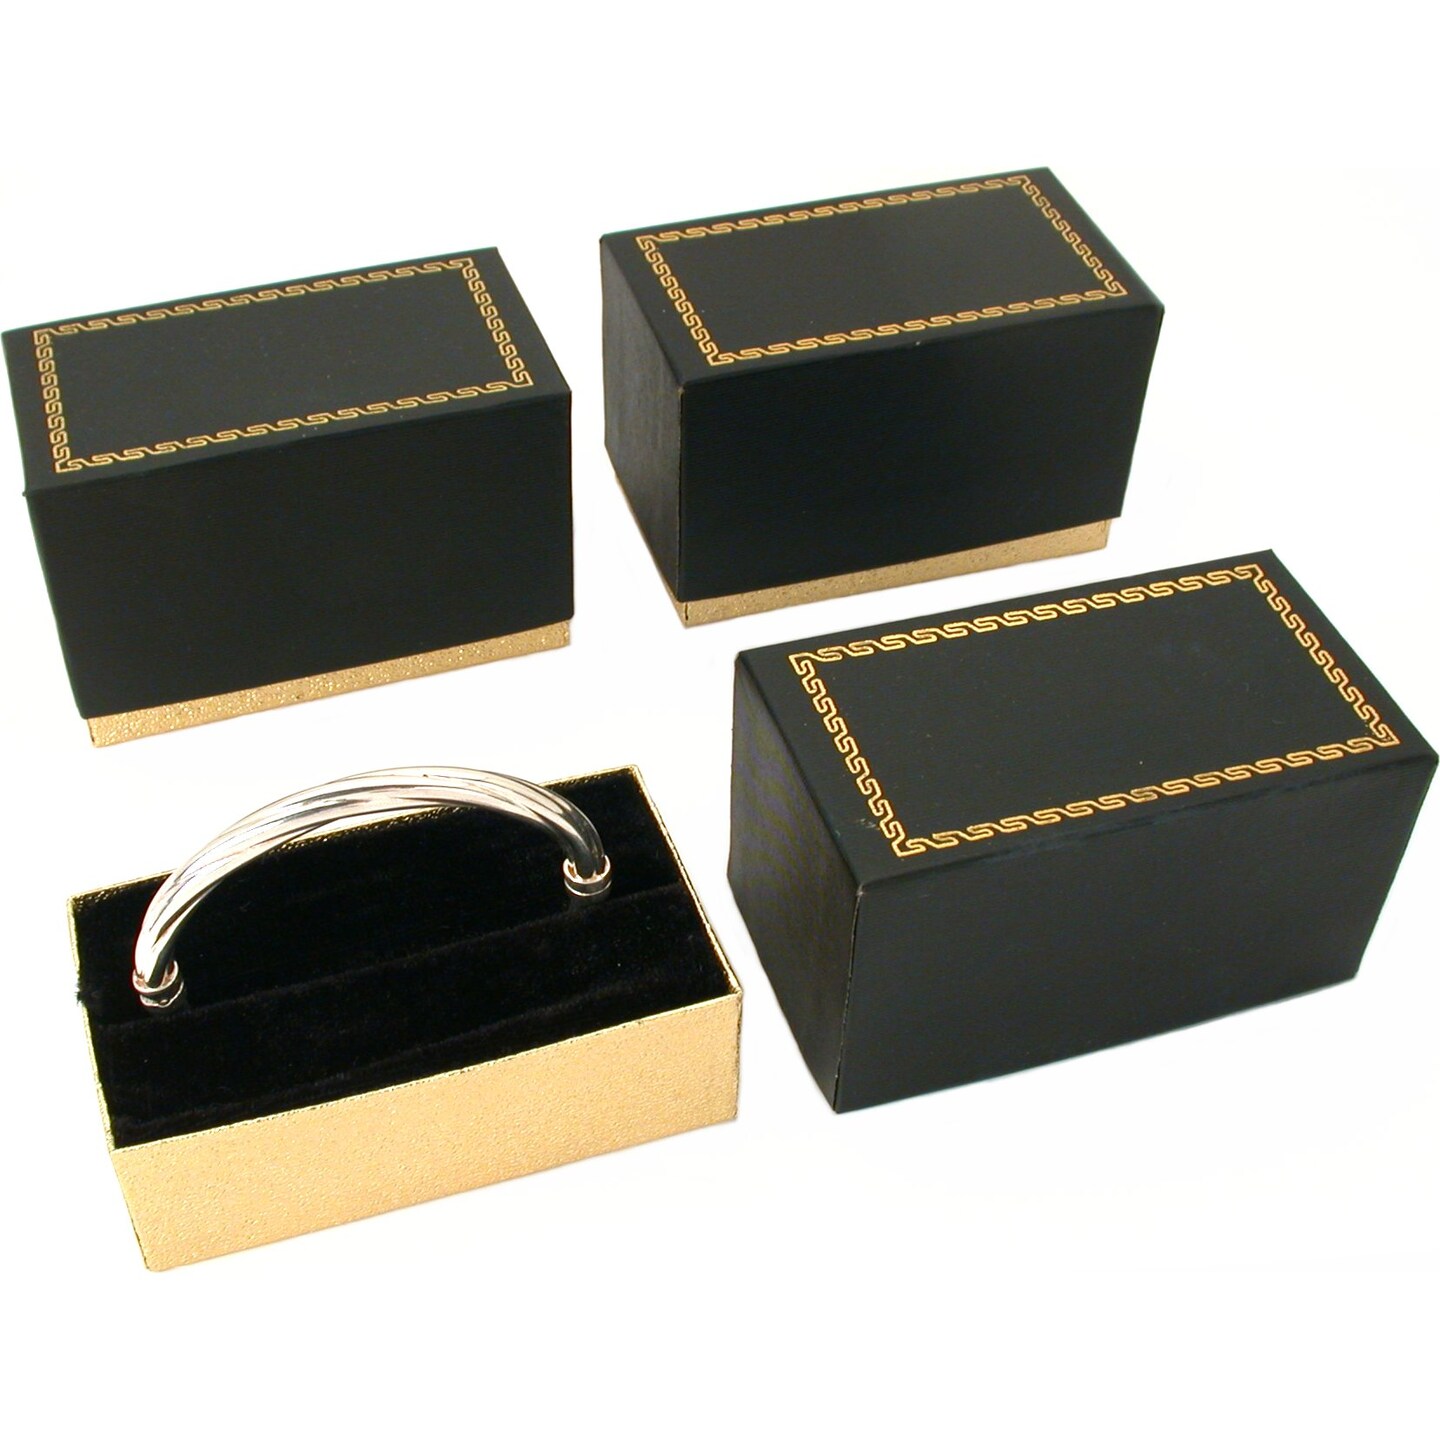 gift boxes ,cheap black gift boxes with lids ,decorative boxes with lids,  glitter gift boxes ,small gift boxes, wholesale decorative gift boxes